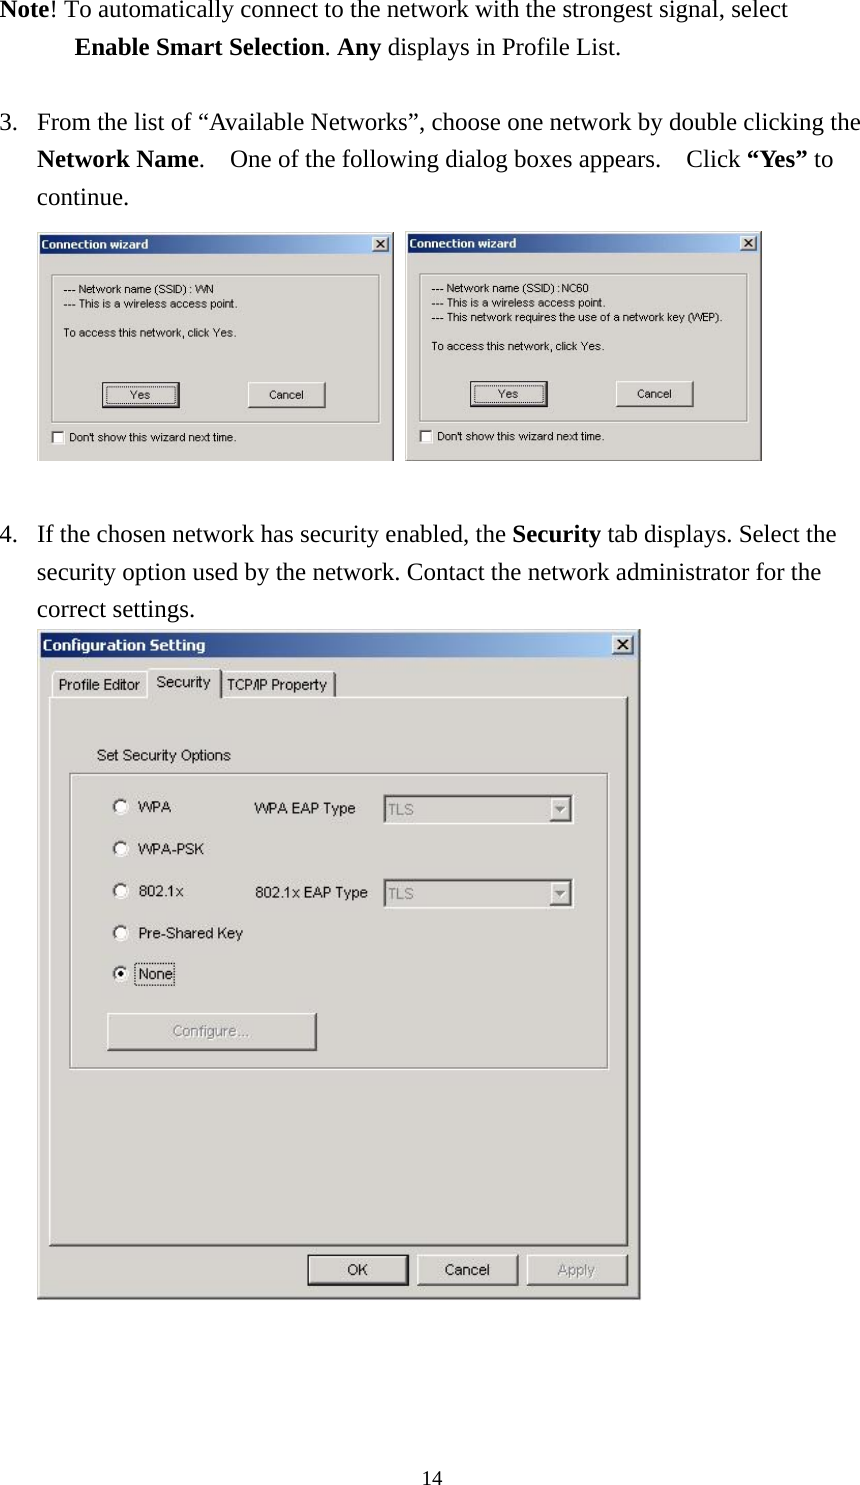  14Note! To automatically connect to the network with the strongest signal, select Enable Smart Selection. Any displays in Profile List.  3. From the list of “Available Networks”, choose one network by double clicking the Network Name.    One of the following dialog boxes appears.    Click “Yes” to continue.     4. If the chosen network has security enabled, the Security tab displays. Select the security option used by the network. Contact the network administrator for the correct settings.     